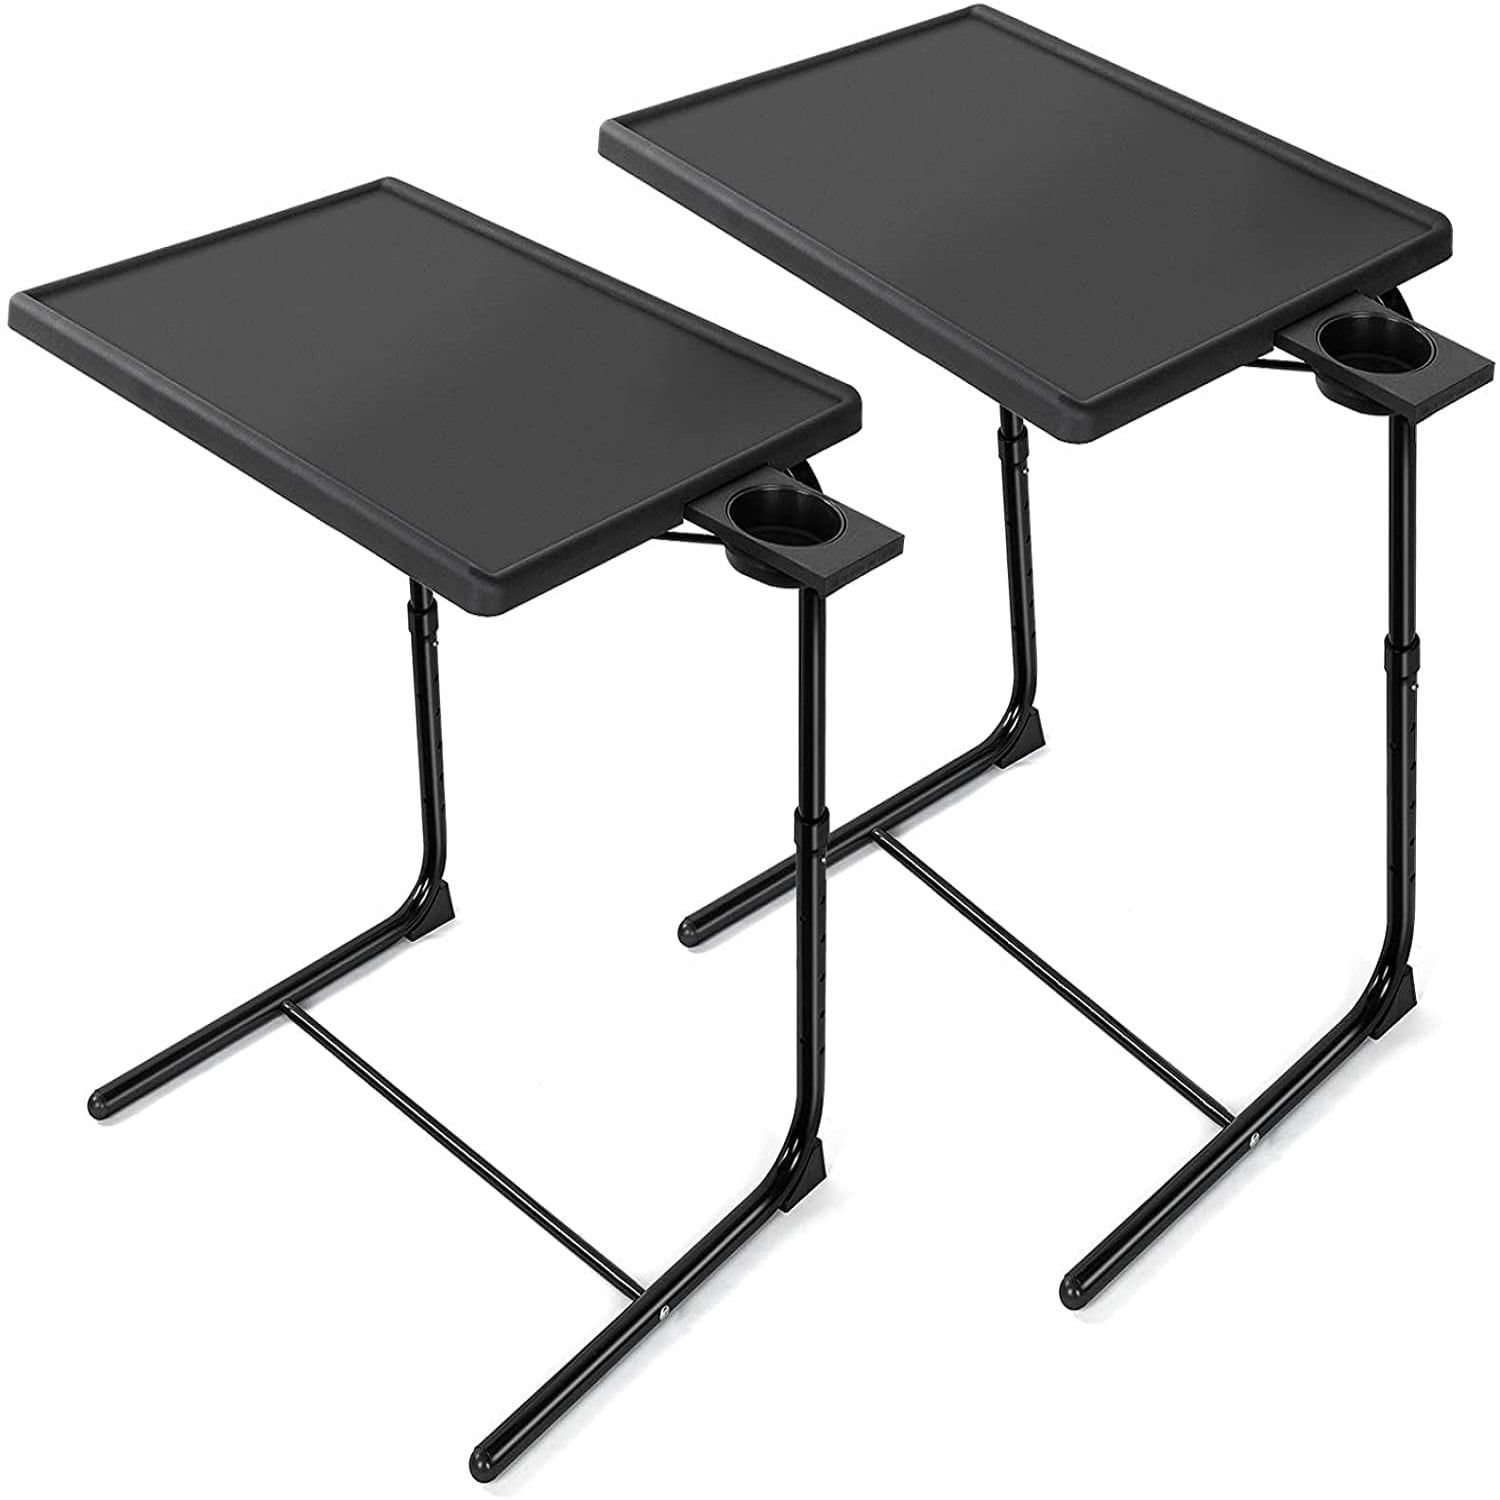 Buy 2 Pack Portable Foldable 6 Height & 3 Tilt Angles Adjustable Tv With Regard To Foldable Portable Adjustable Tv Stands (View 4 of 20)